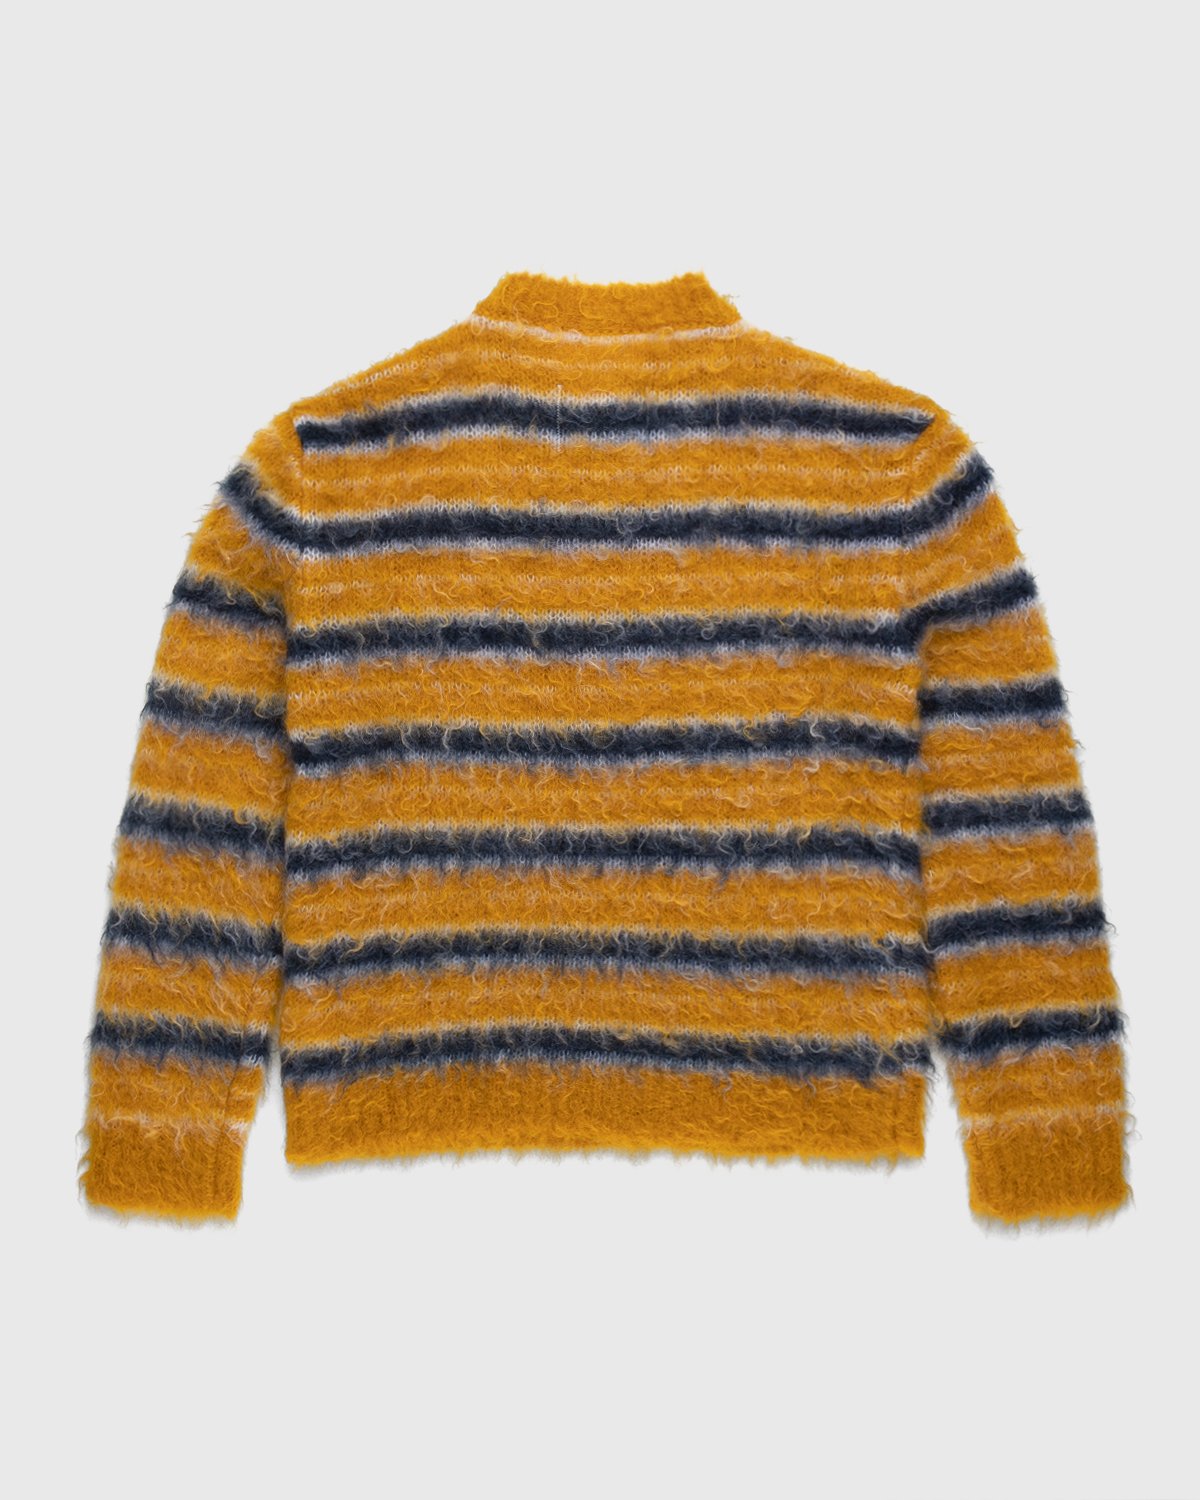 Marni - Striped Mohair Sweater Sunflower - Clothing - Yellow - Image 2